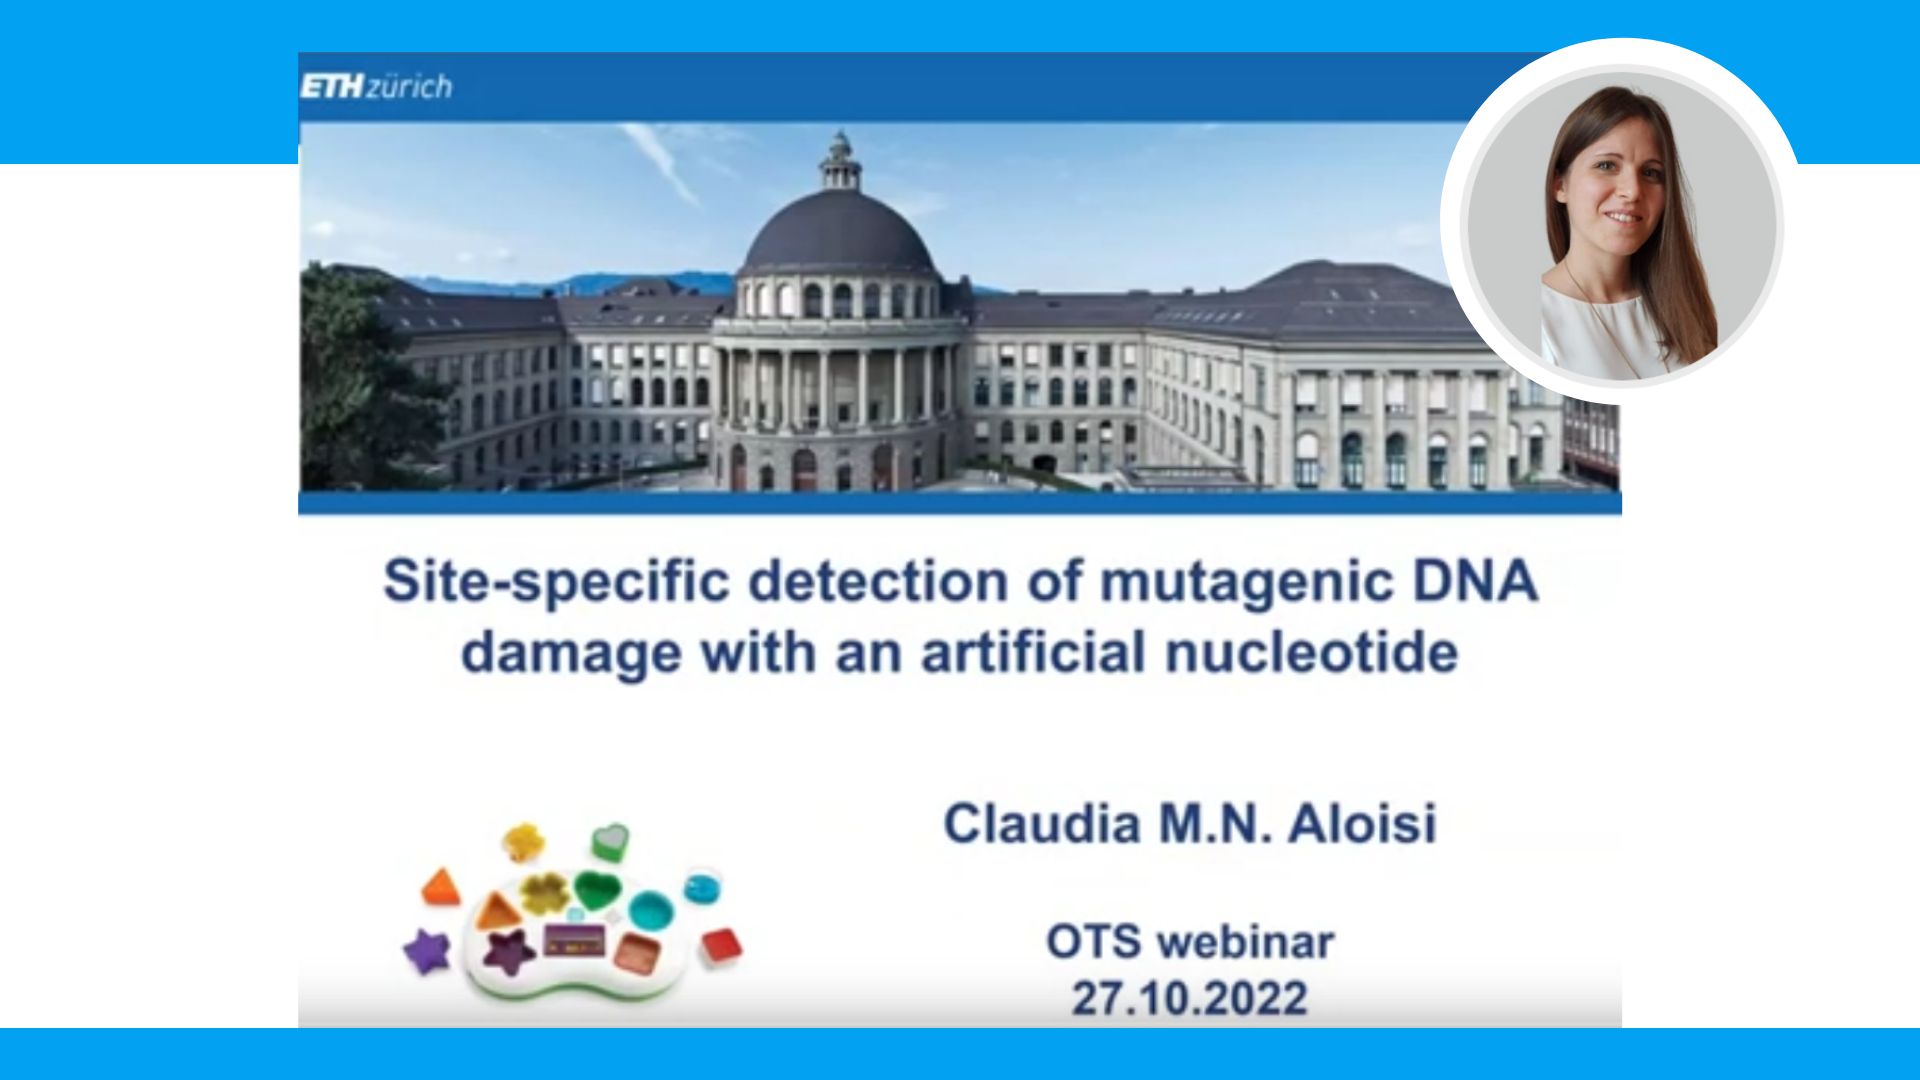 Site-specific detection of mutagenic DNA damage with an artificial nucleotide